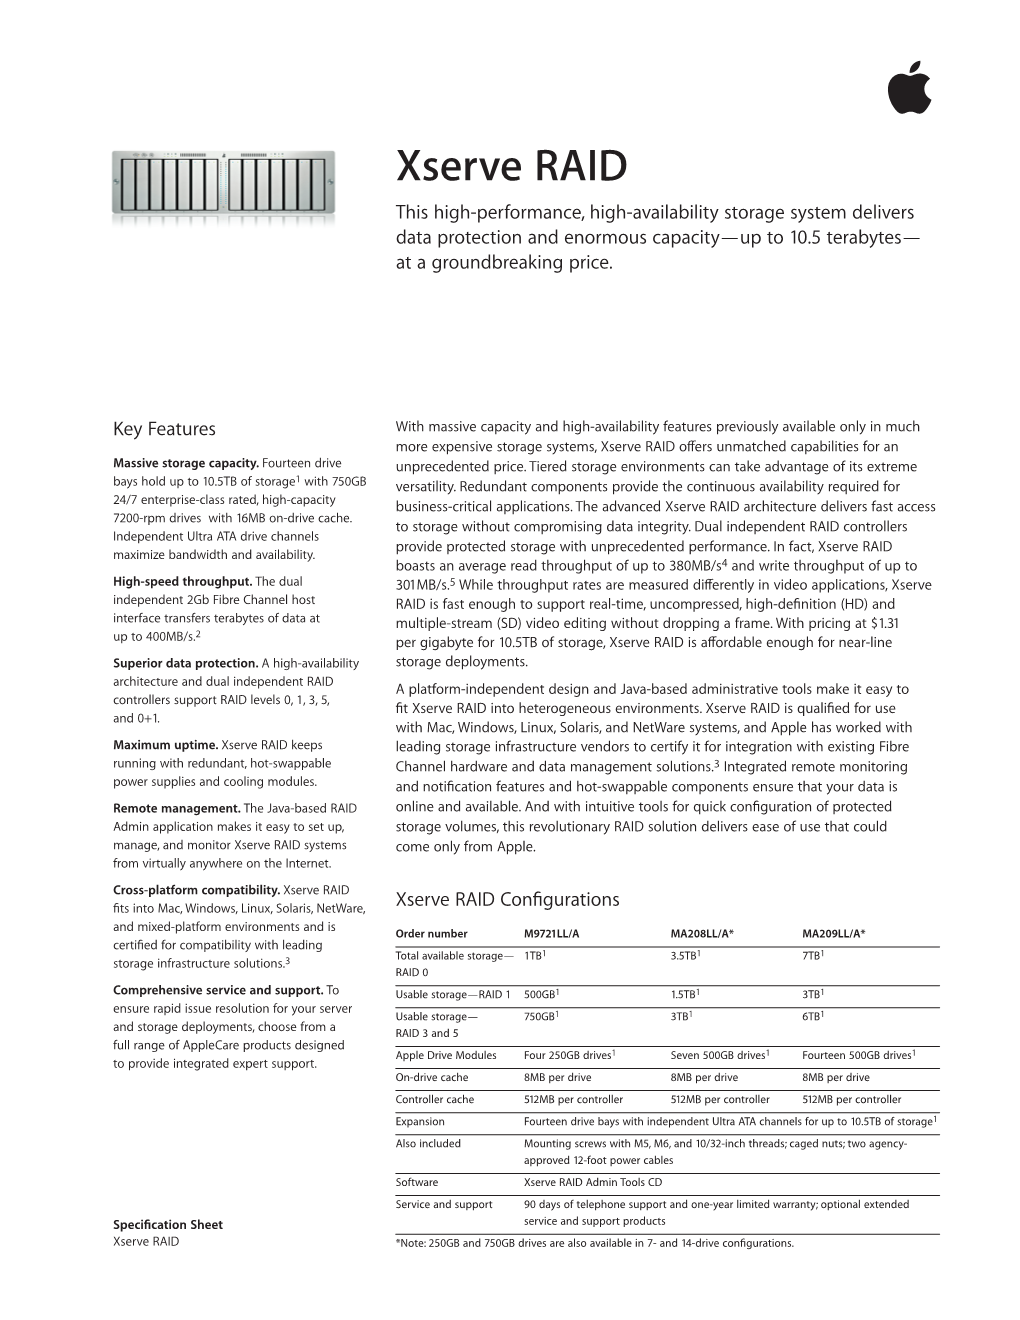 Xserve RAID This High-Performance, High-Availability Storage System Delivers Data Protection and Enormous Capacity—Up to 10.5 Terabytes— at a Groundbreaking Price